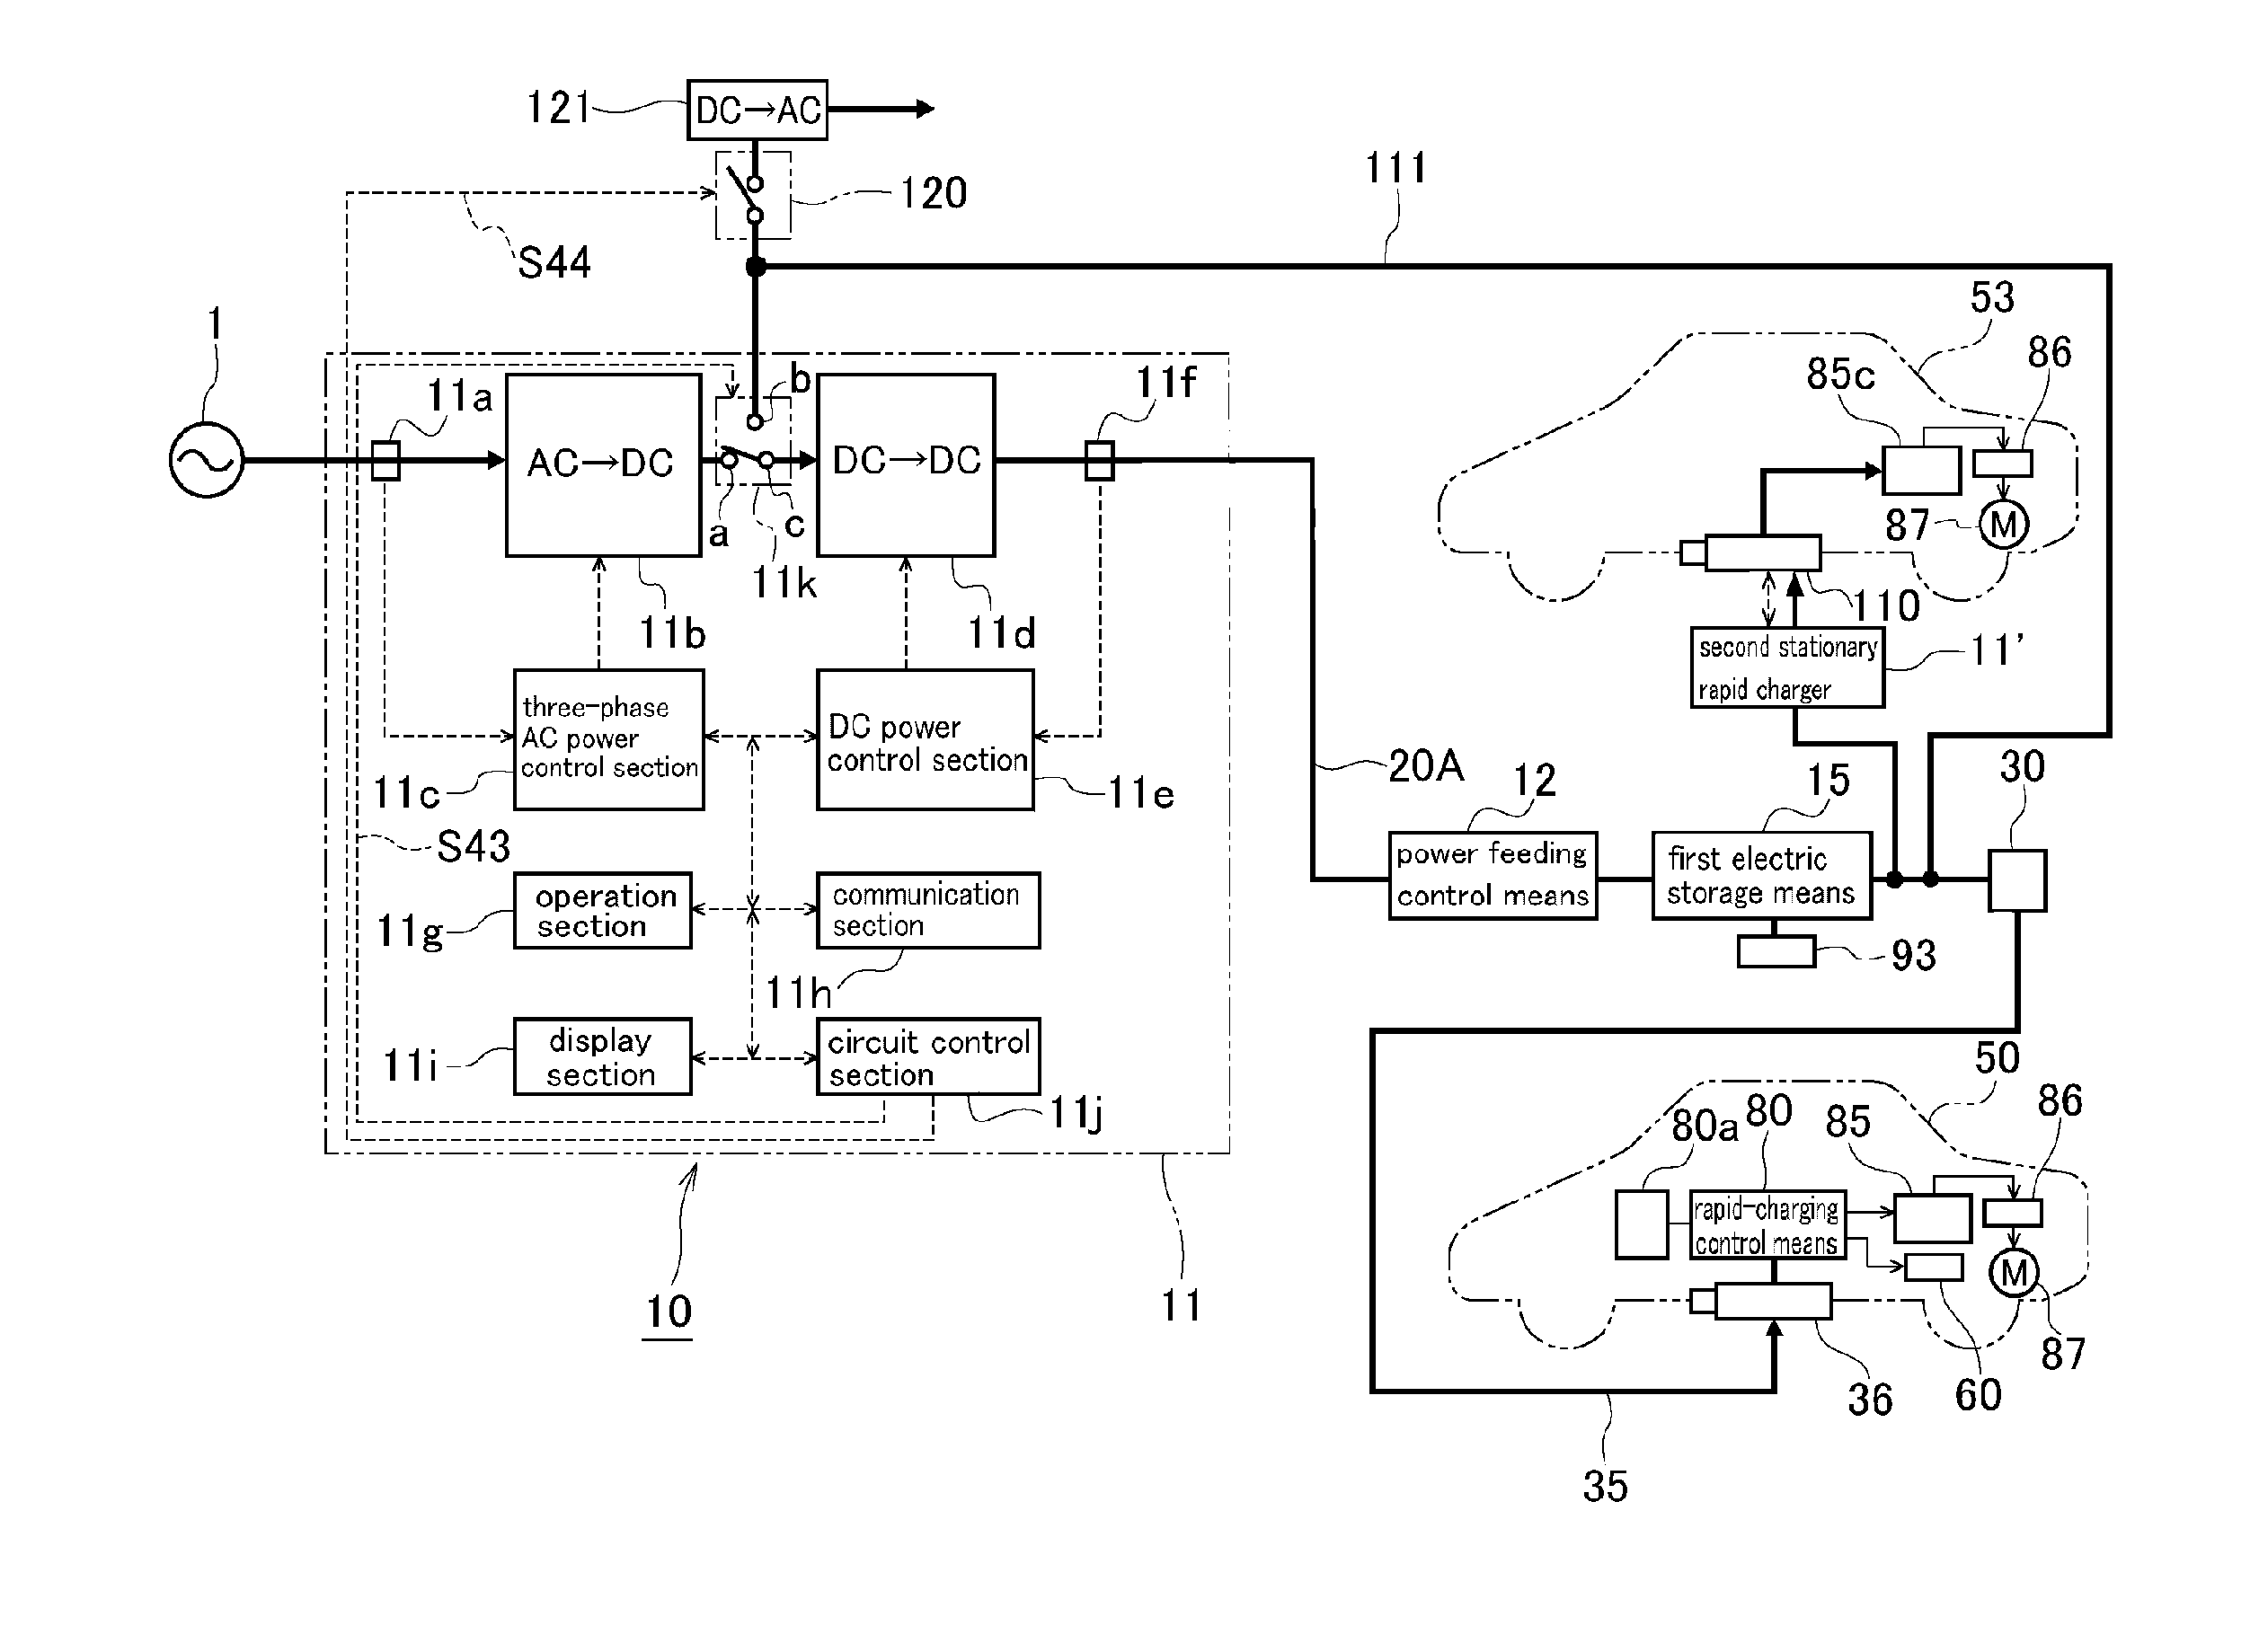 Rapid charging power supply system